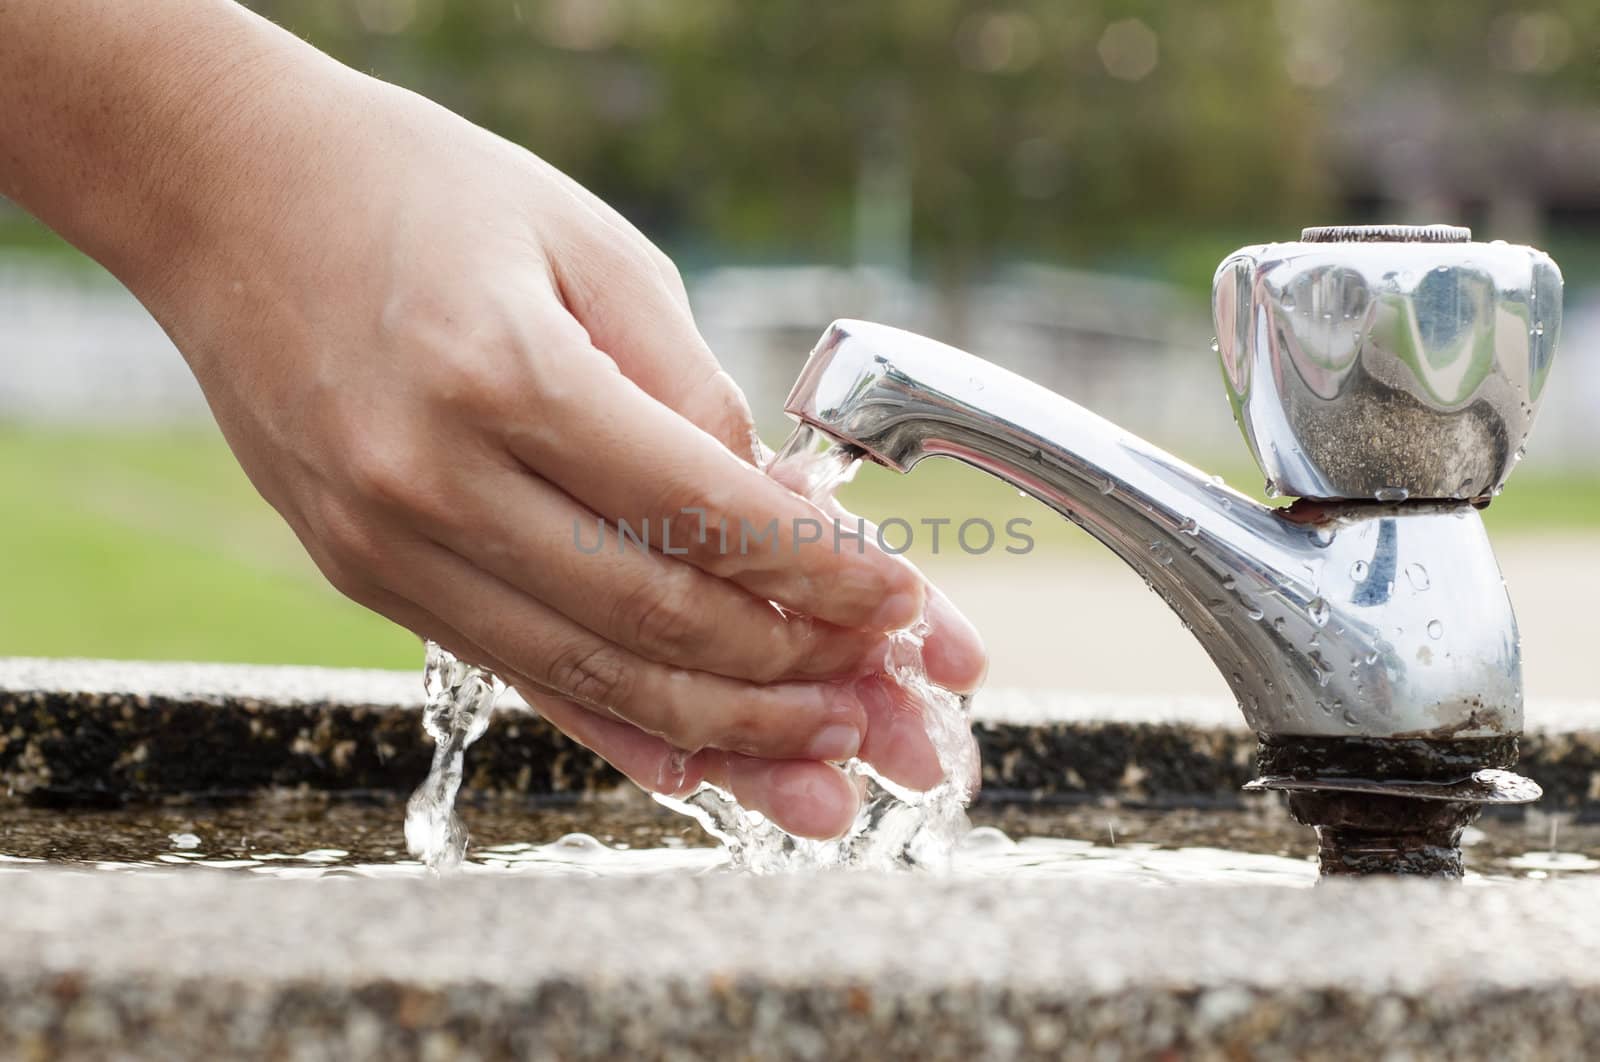 Washing Hands at outdoor     
faucet